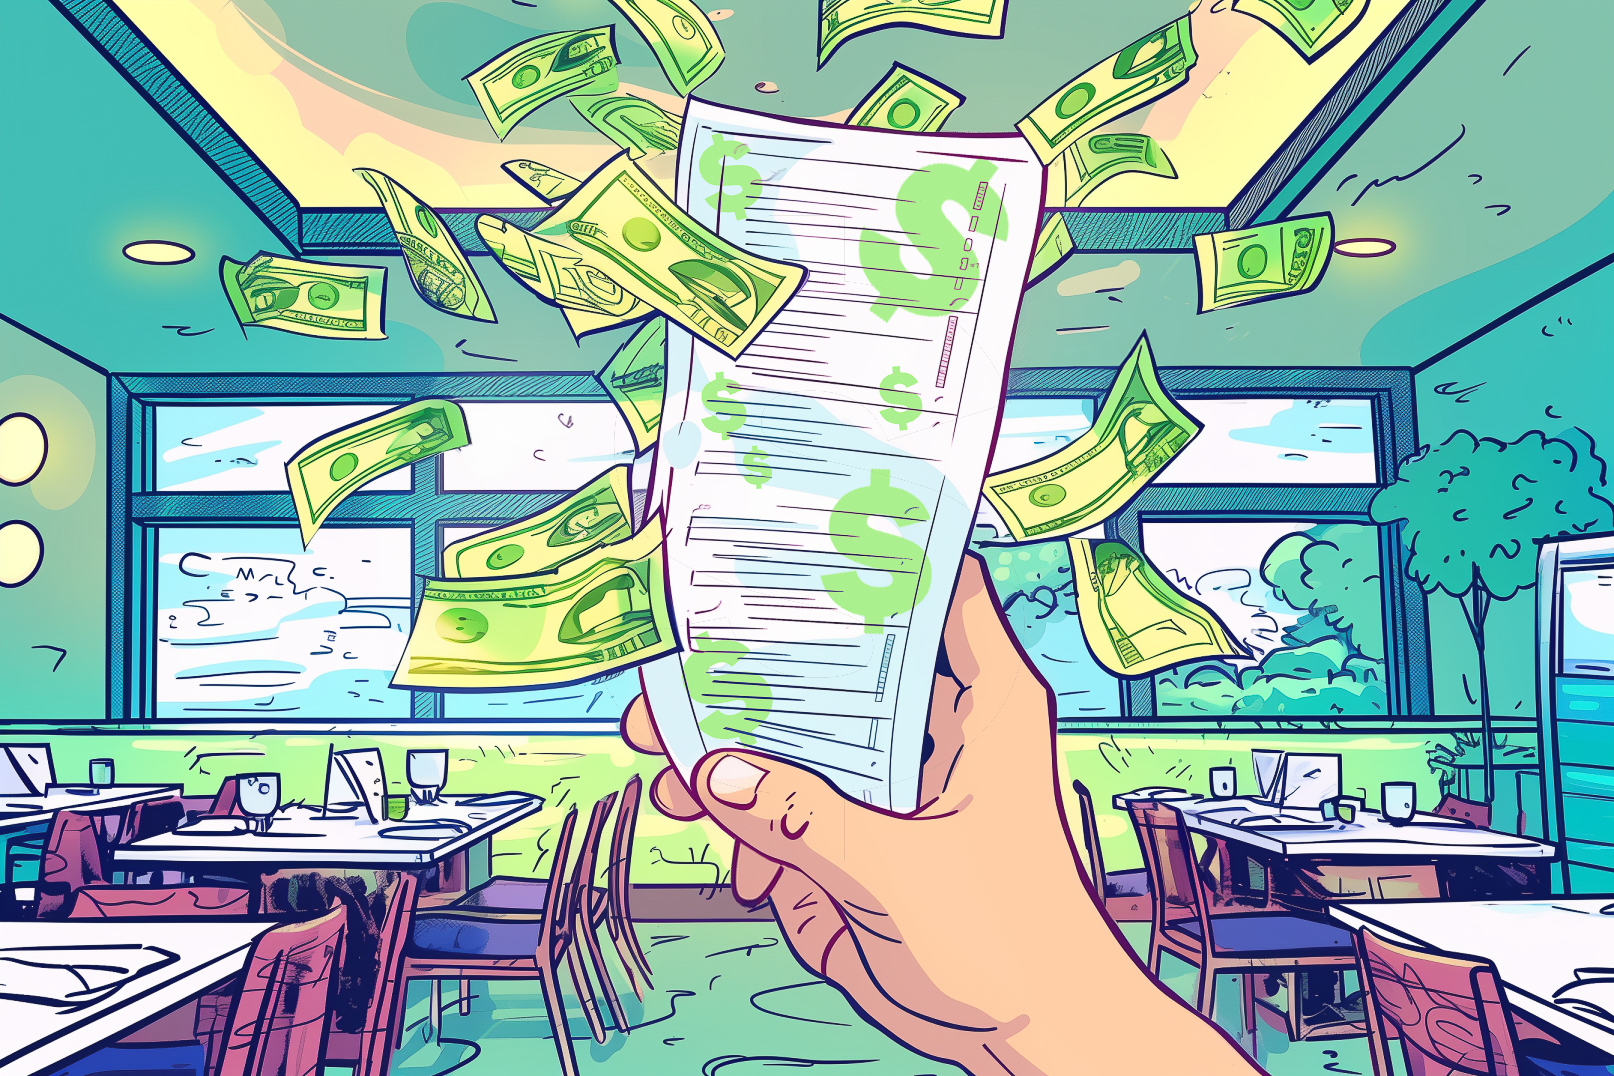 A hand holds a bill, cash flying around in a colorful diner; suggests a pricey meal or wealth.